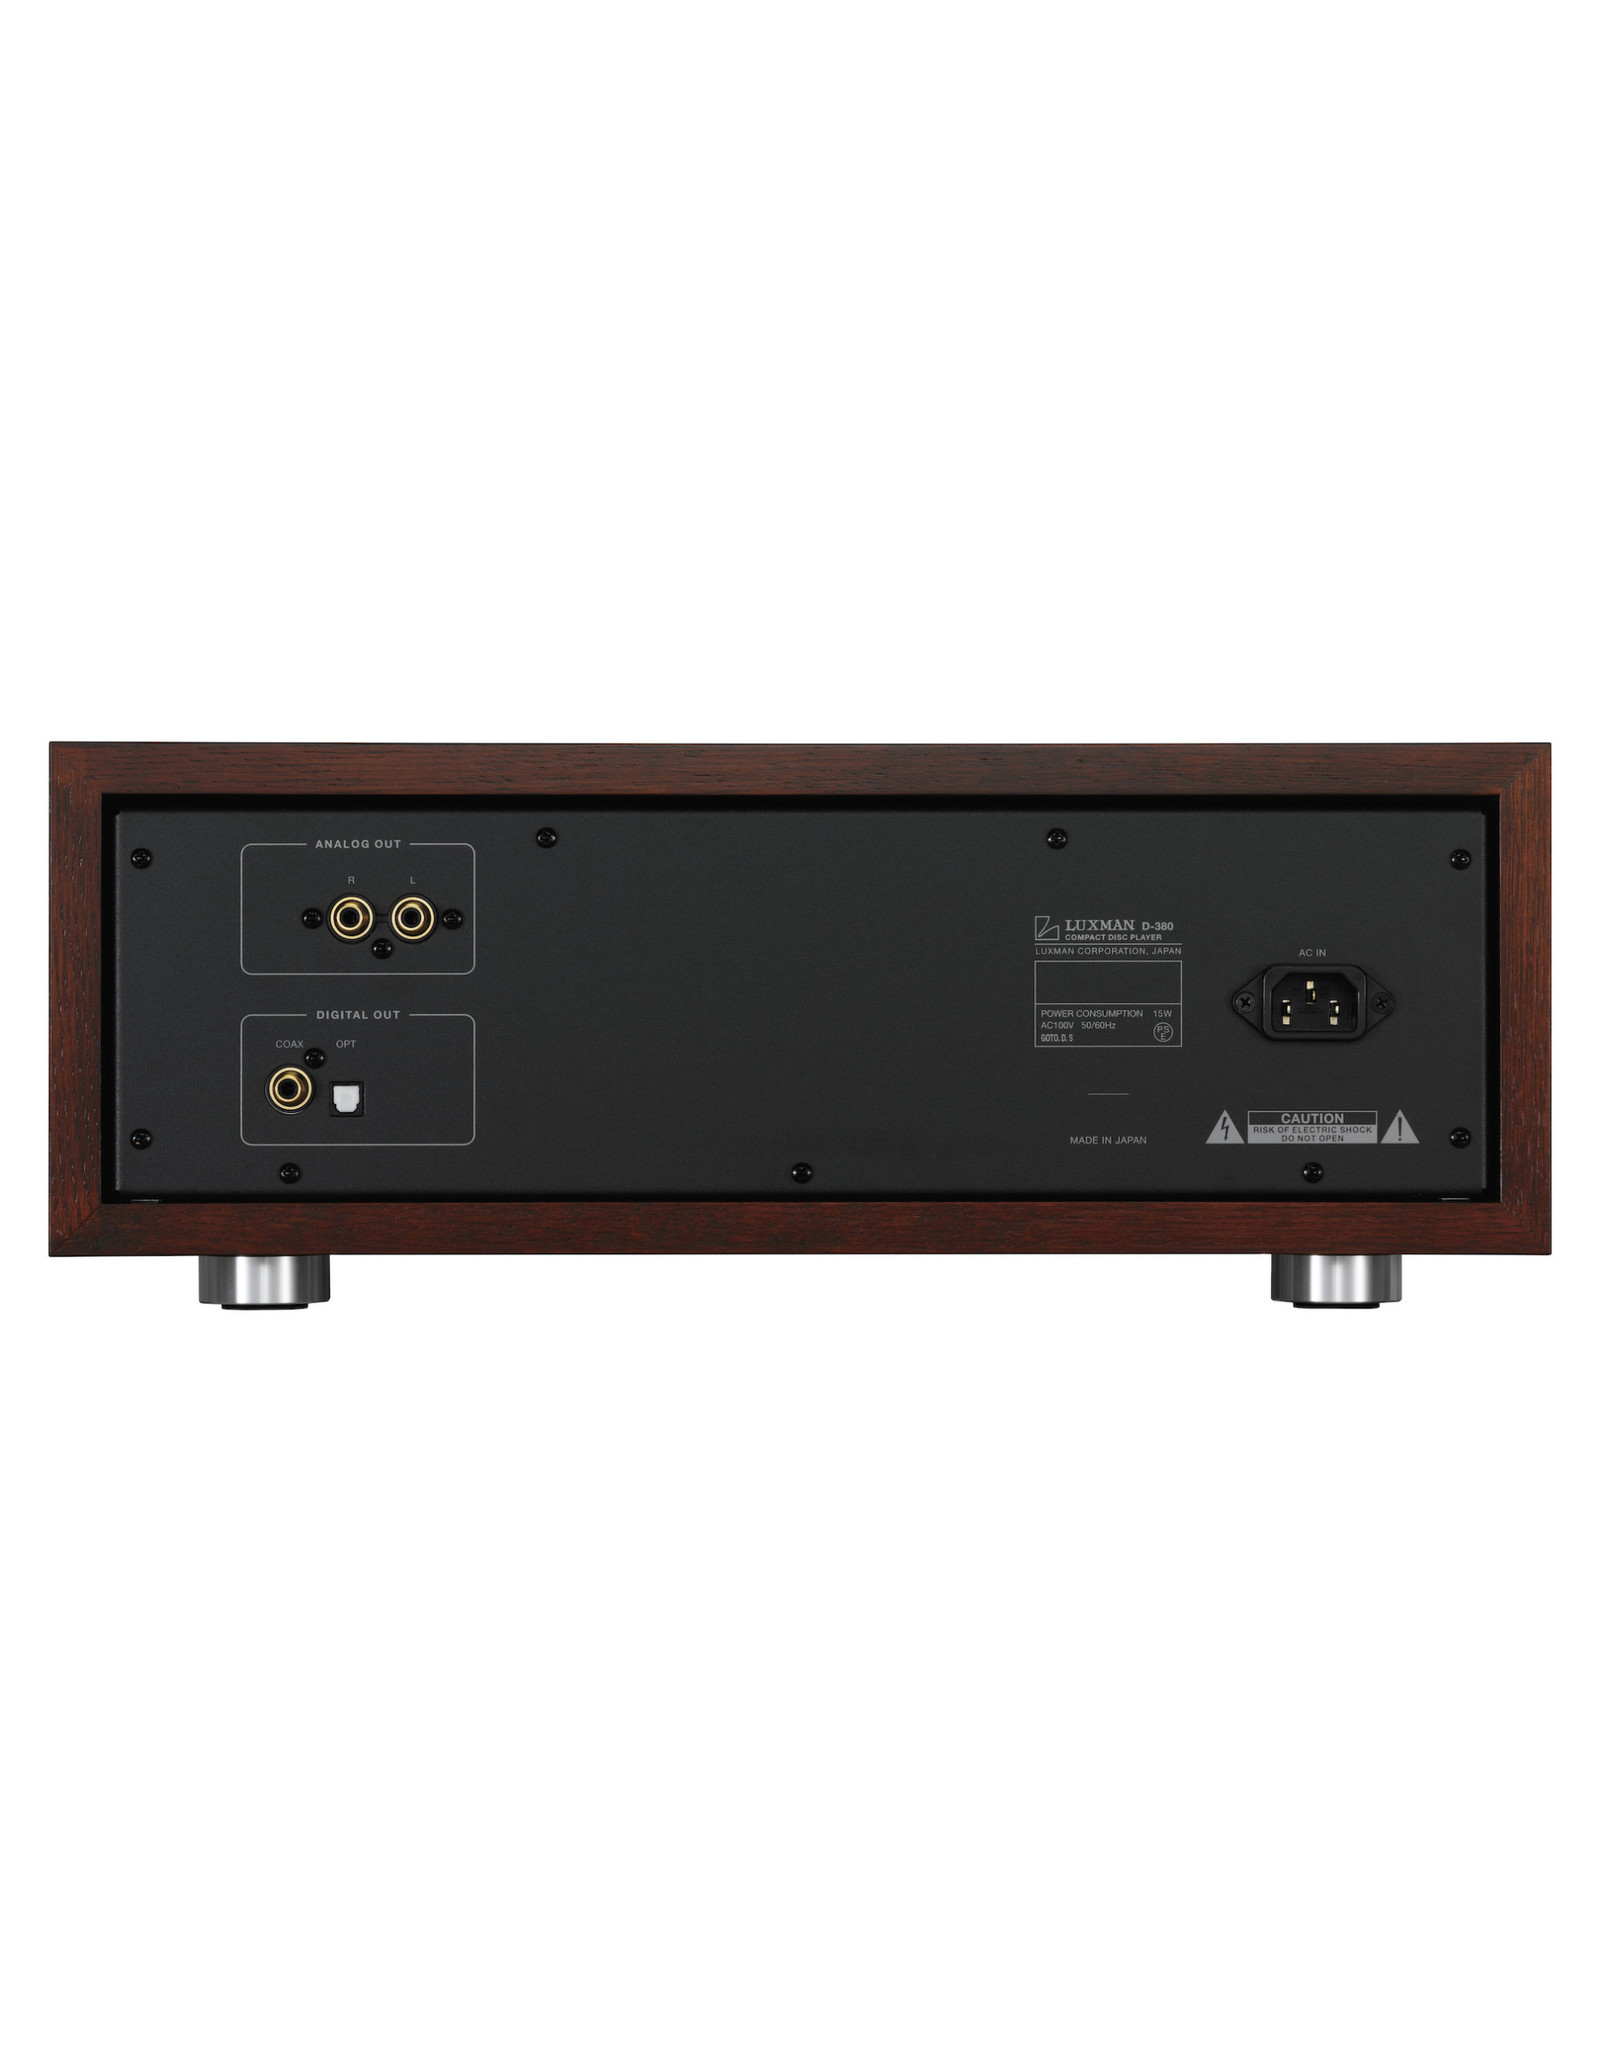 Luxman Luxman D-380 Tube / Solid State CD player